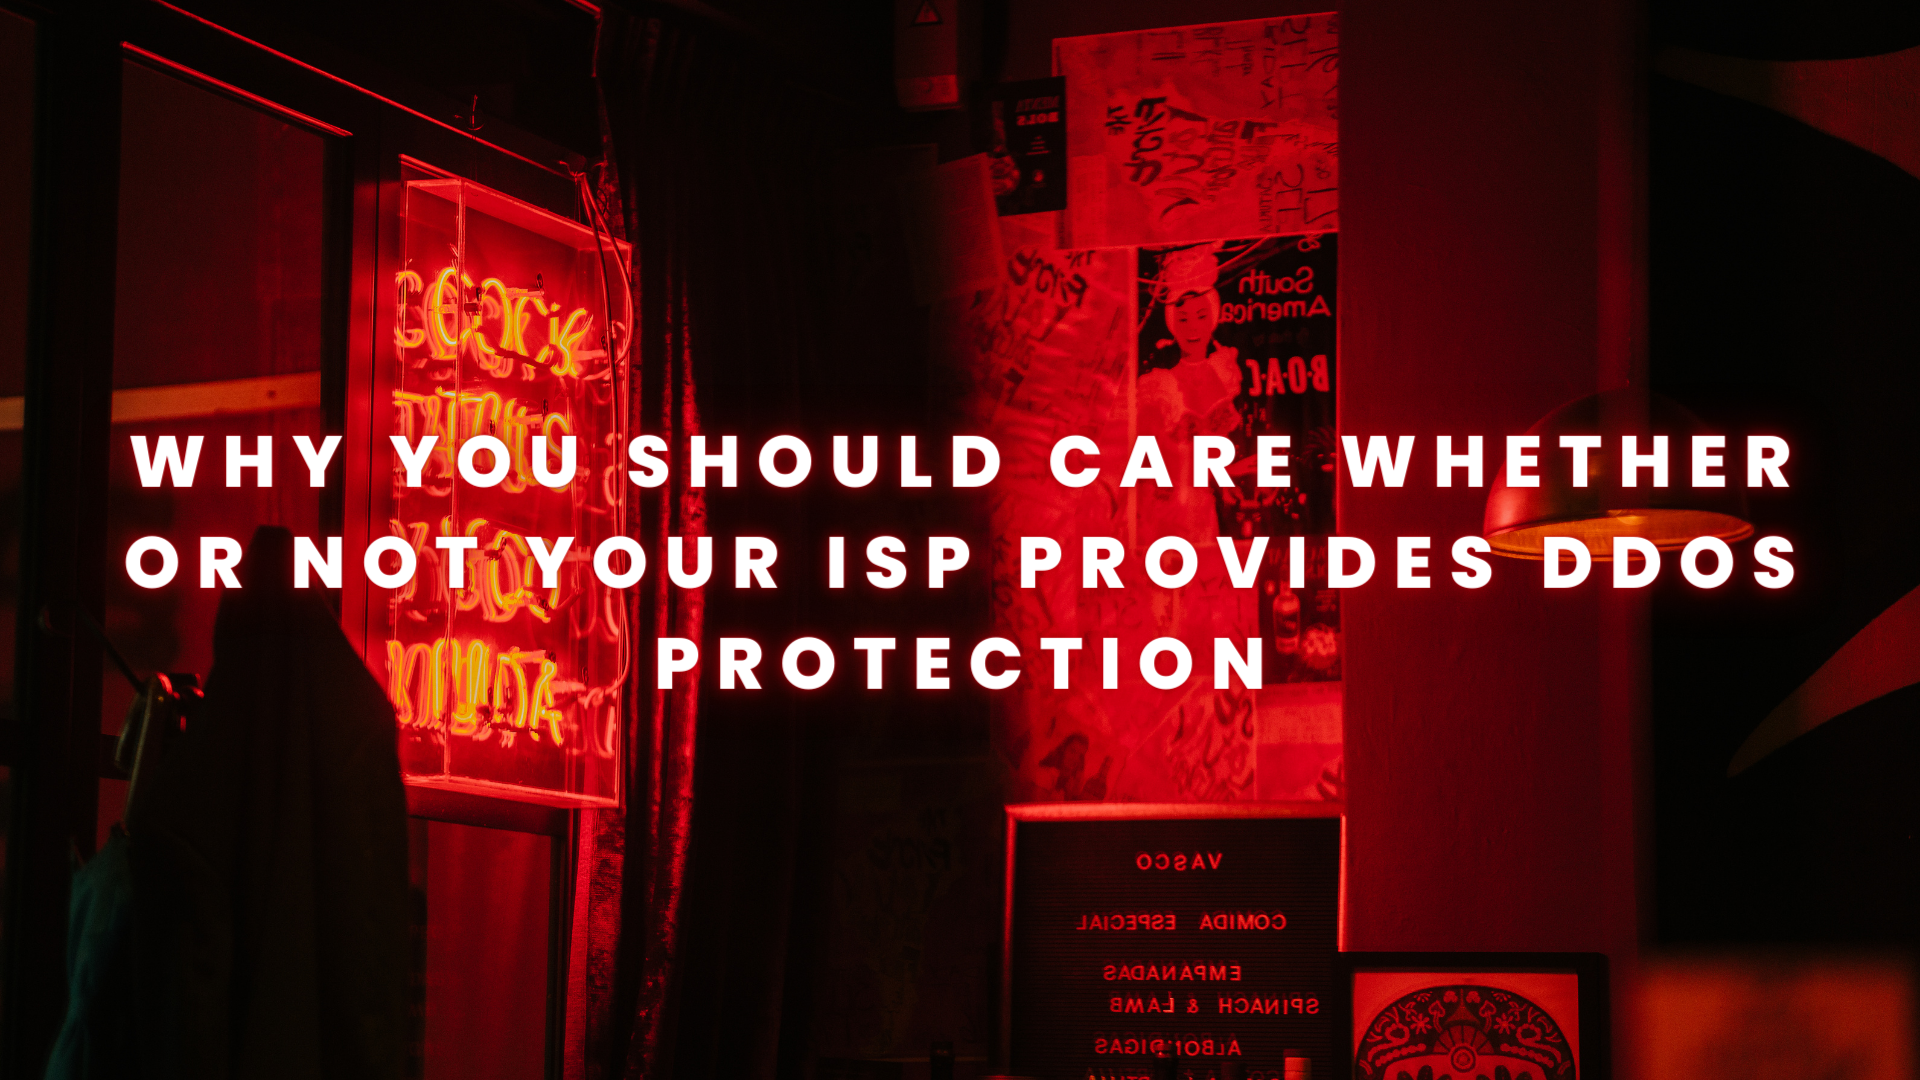 Why You Should Care Whether Or Not Your ISP Provides DDoS Protection